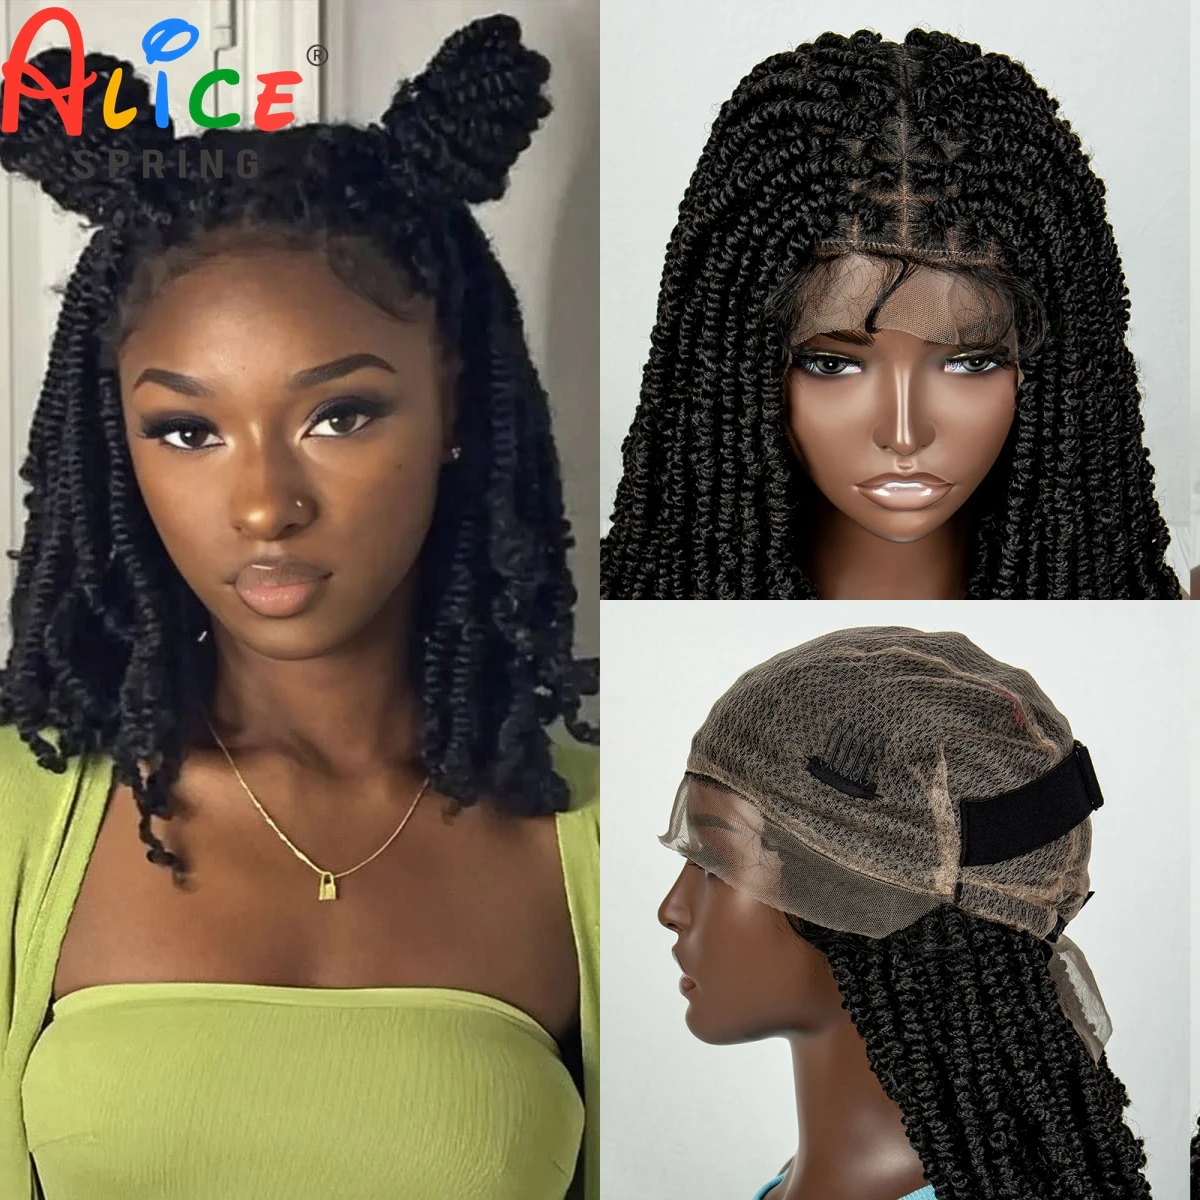 

16 Inch Synthetic Spring Twist Wig Knotless Full Lace Braided Wig for Women Cornrow Pre-Twisted Braids Passion Twist Braid Wig